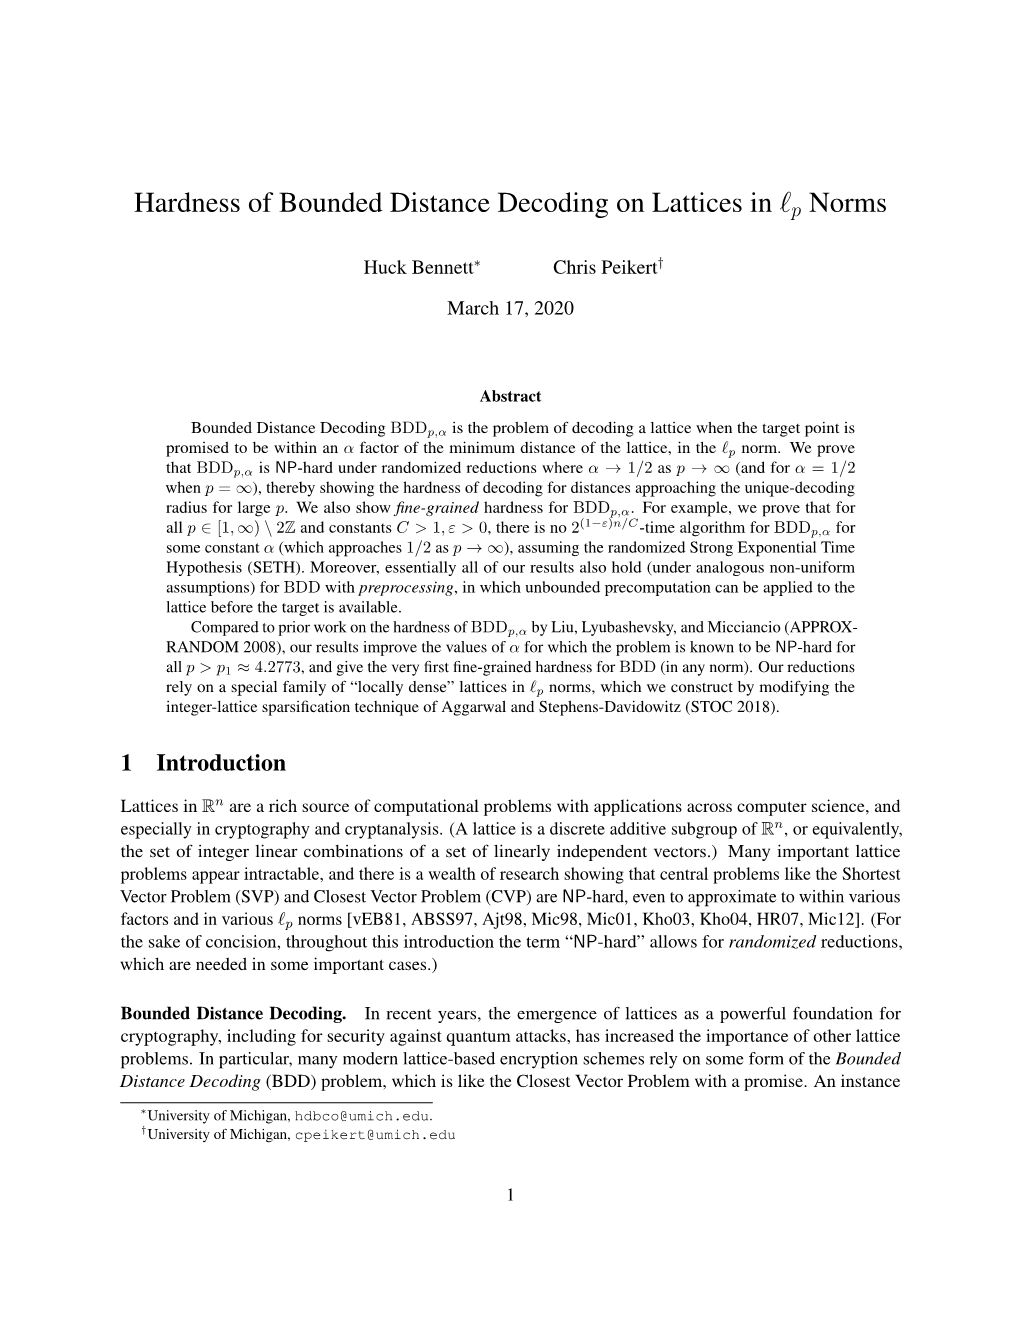 Hardness of Bounded Distance Decoding on Lattices in Lp Norms